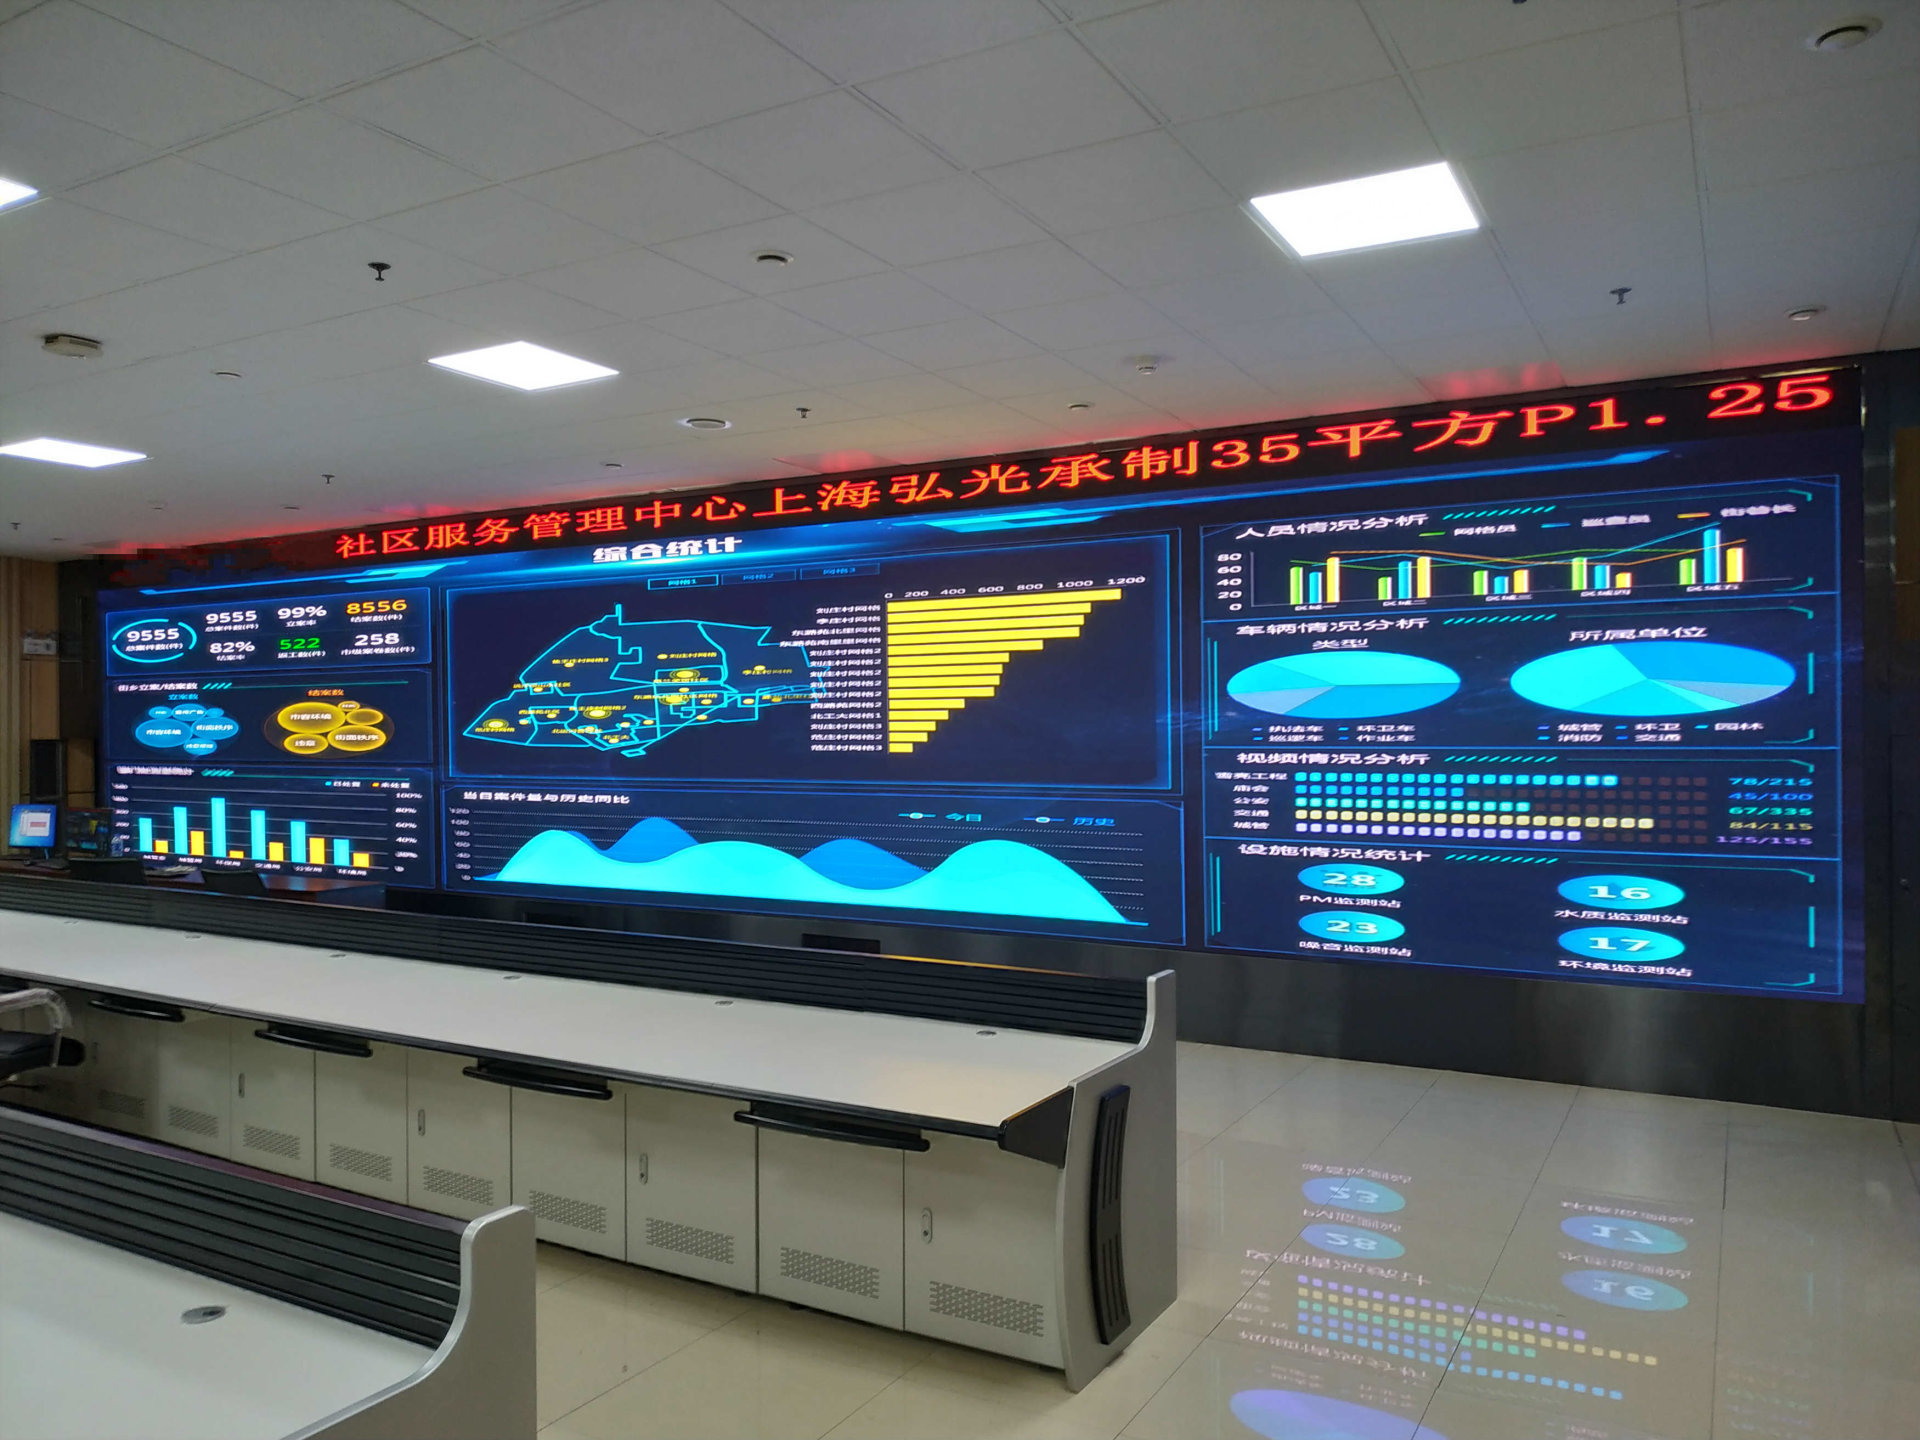 A community center control center in Beijing